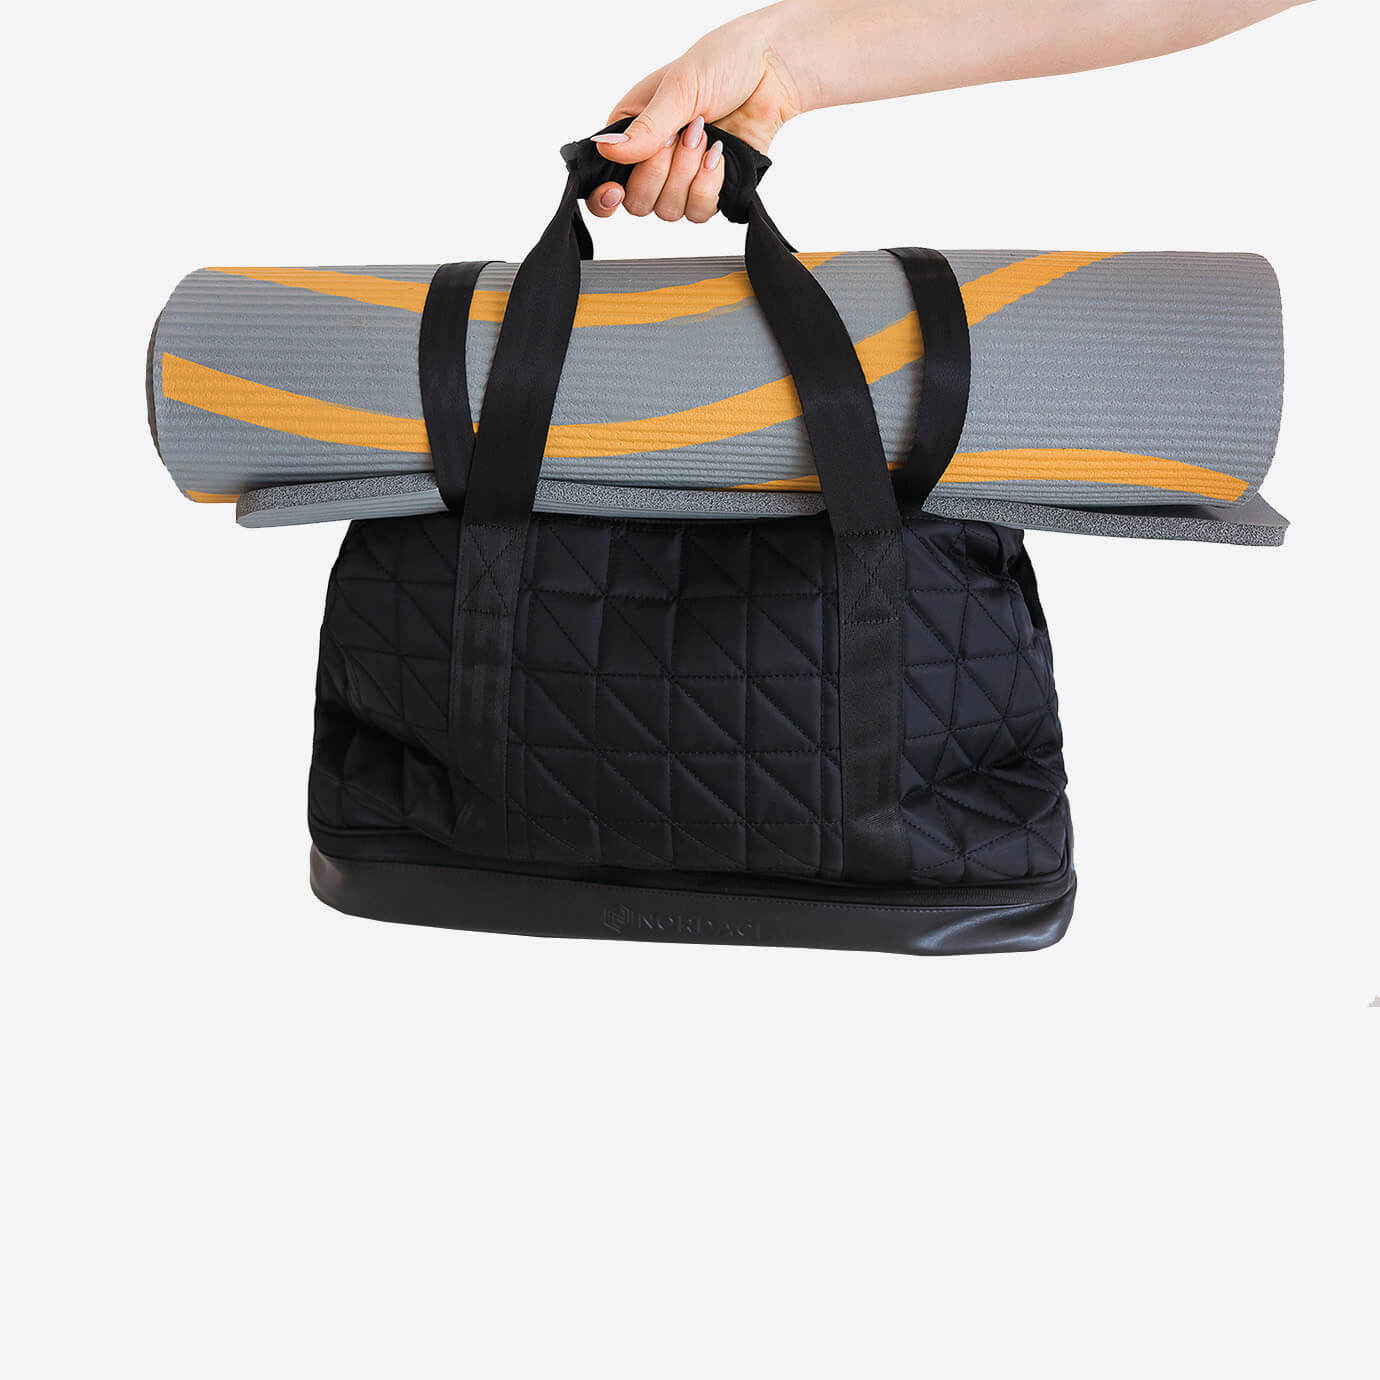 Nordace - 8 Reasons Why Nordace Orléans Duffel Bag Is the Best Bag for  Work, Gym, Yoga & Travel